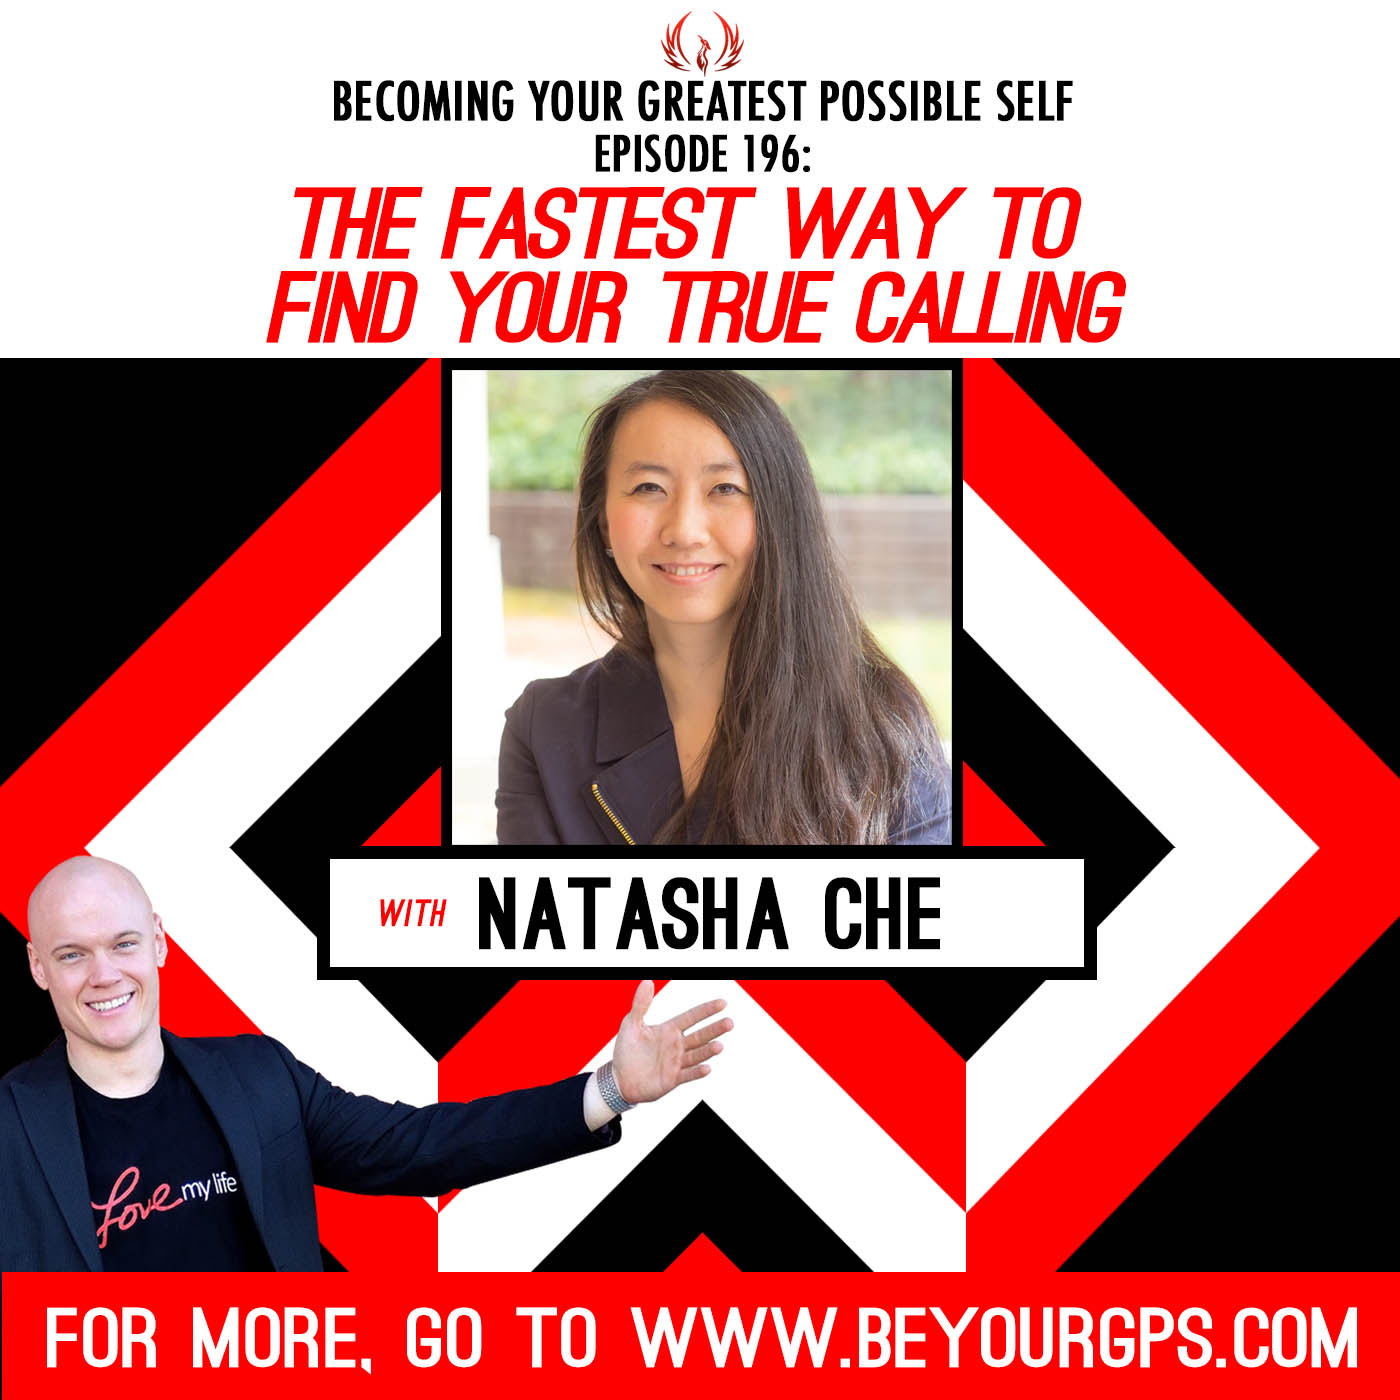 The Fastest Way to Find Your True Calling with Natasha Che